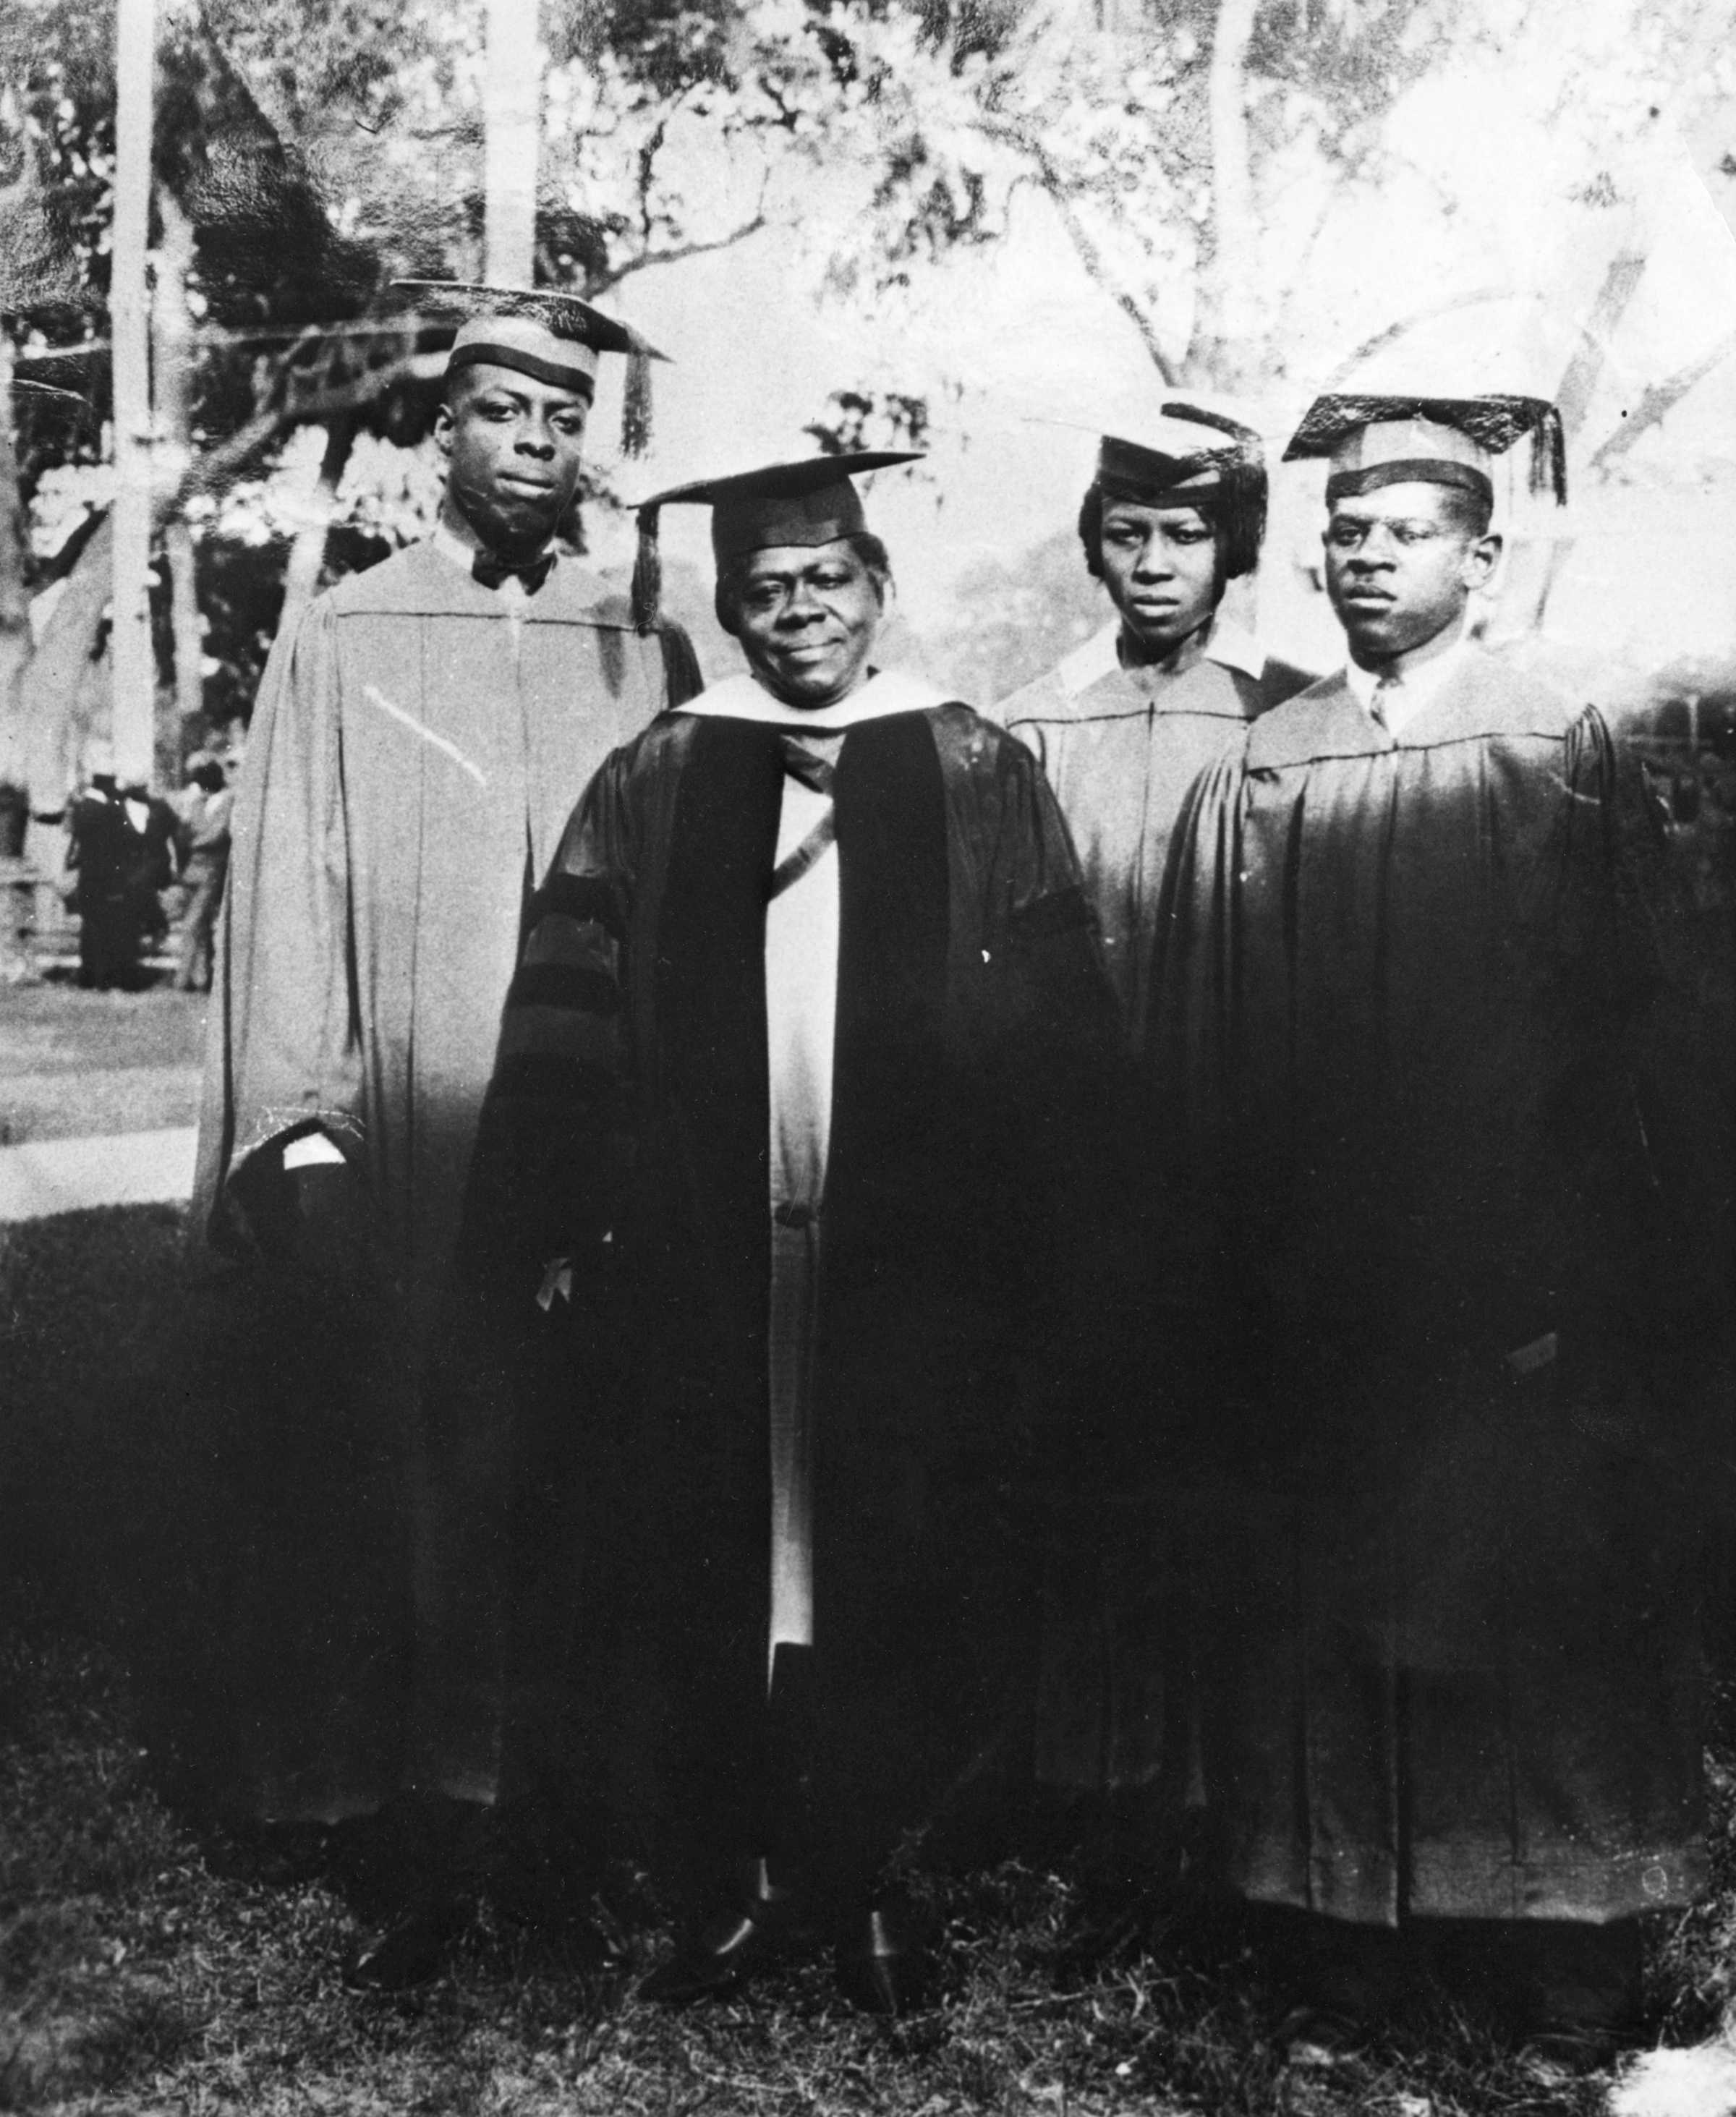 Photograph of Mary McLeod Bethune with graduates of the Daytona-Cookman Collegiate Institute